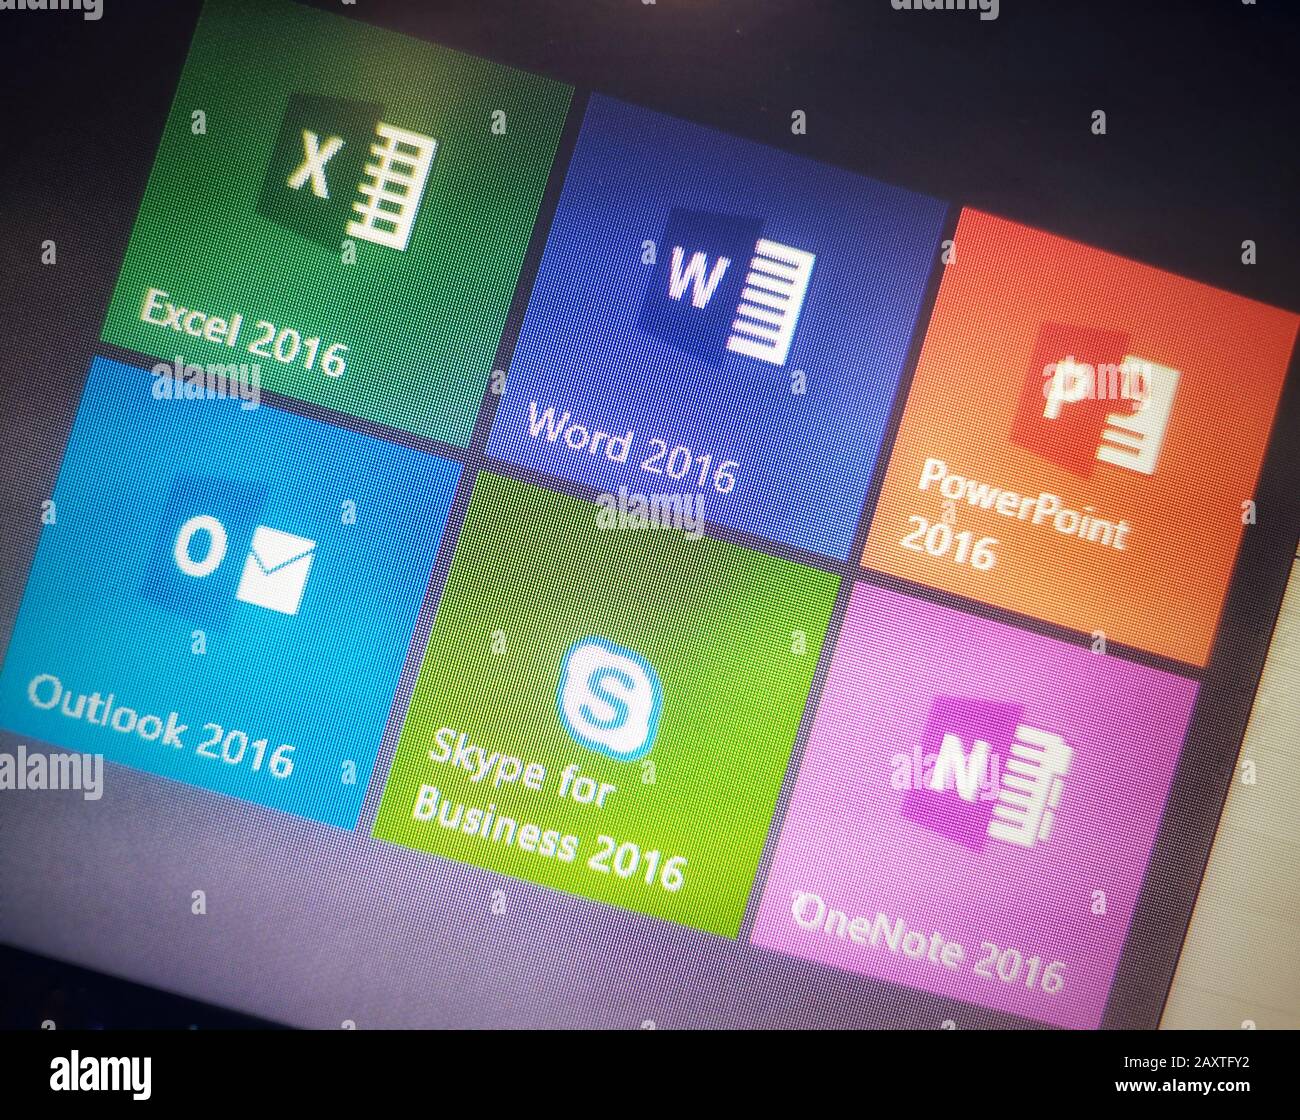 Microsoft Office suite icons on a computer screen from windows 10 start menu  Stock Photo